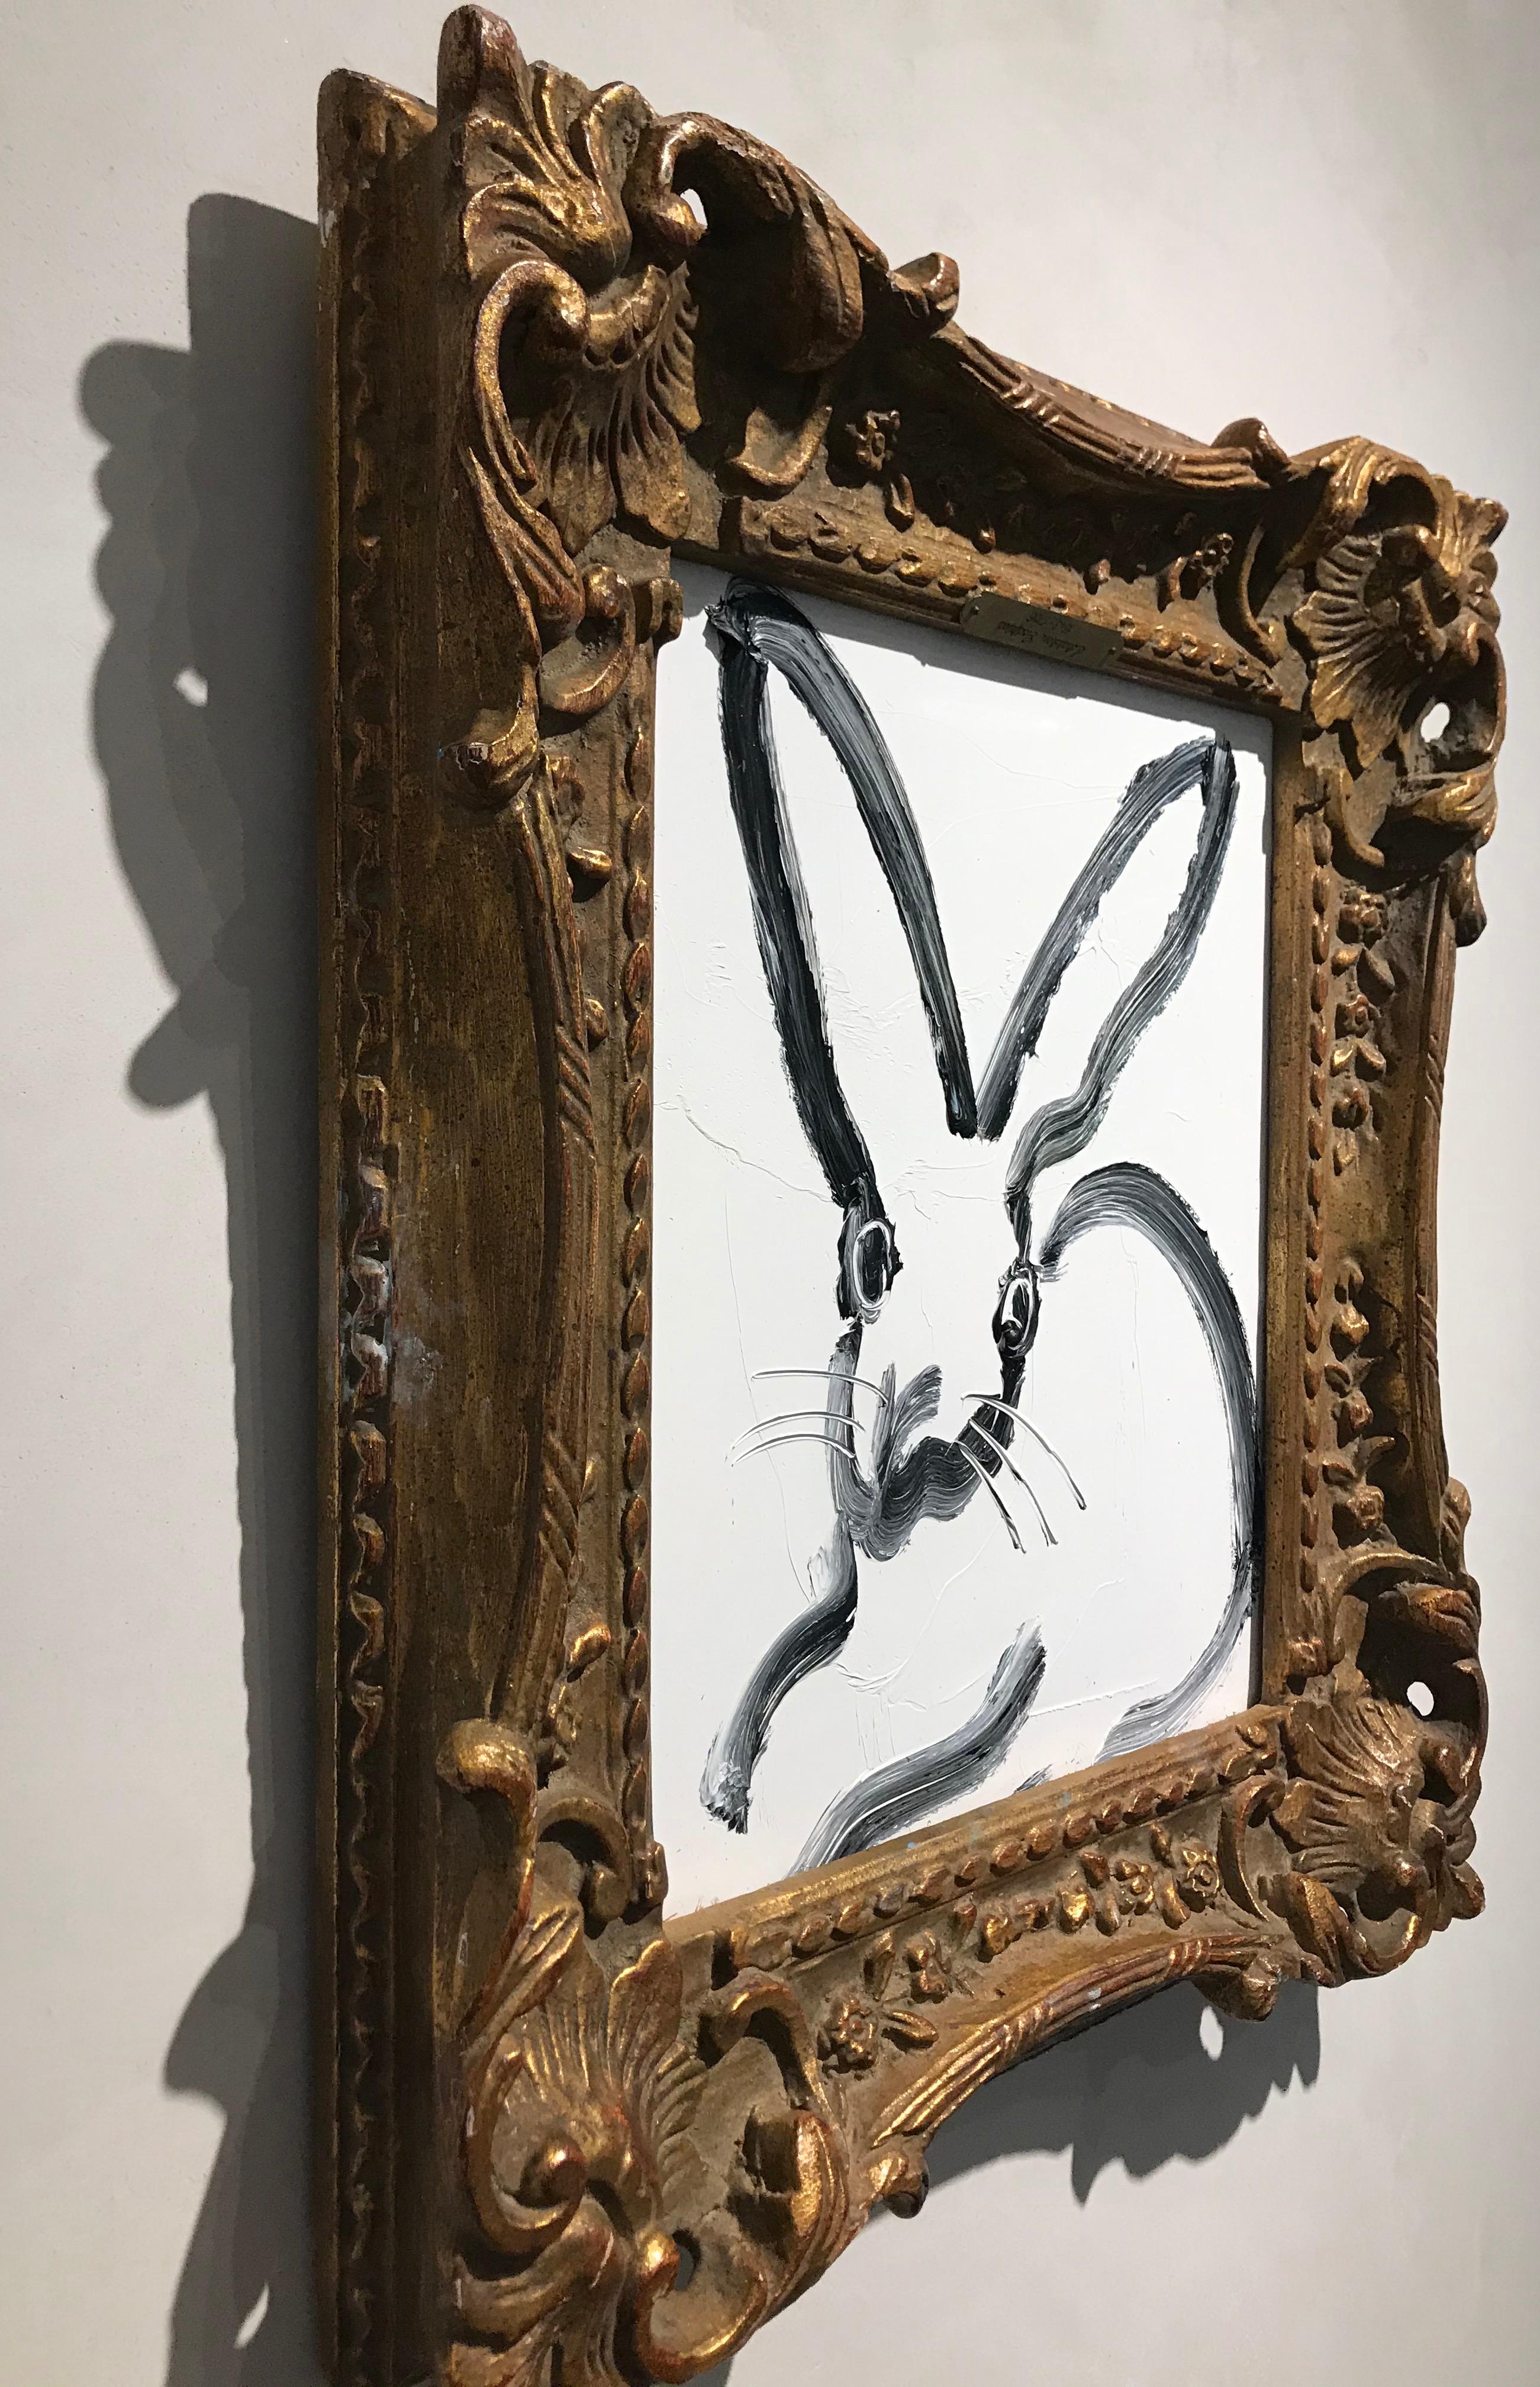 The Rabbit Hole- gestural white and black bunny painting in ornate frame - Neo-Expressionist Painting by Hunt Slonem